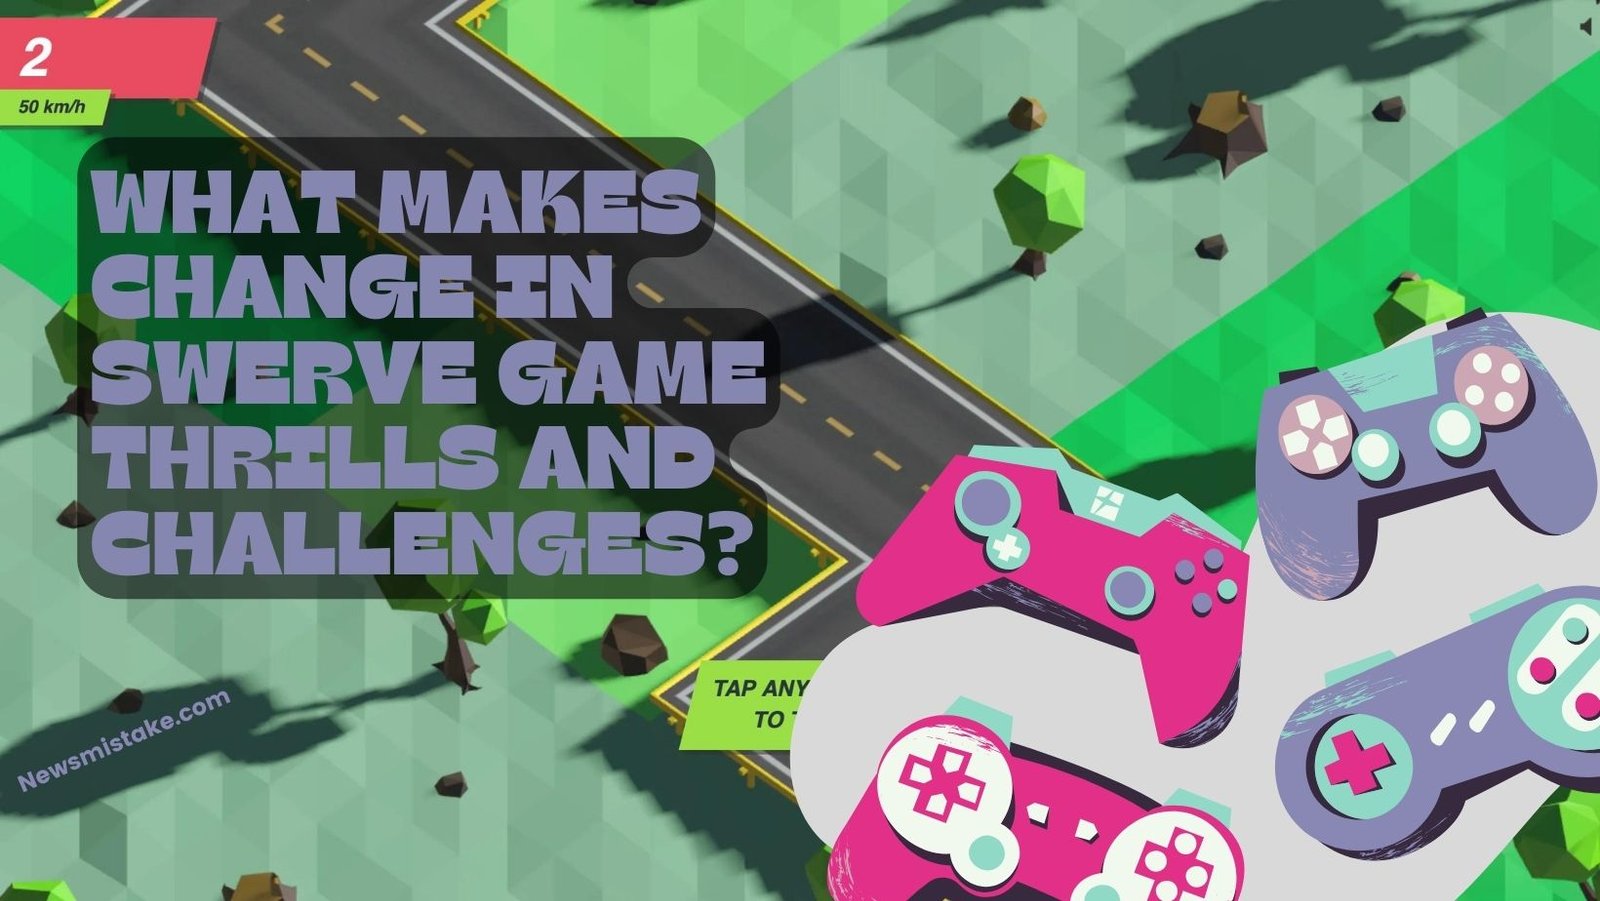 Swerve Game Thrills and Challenges